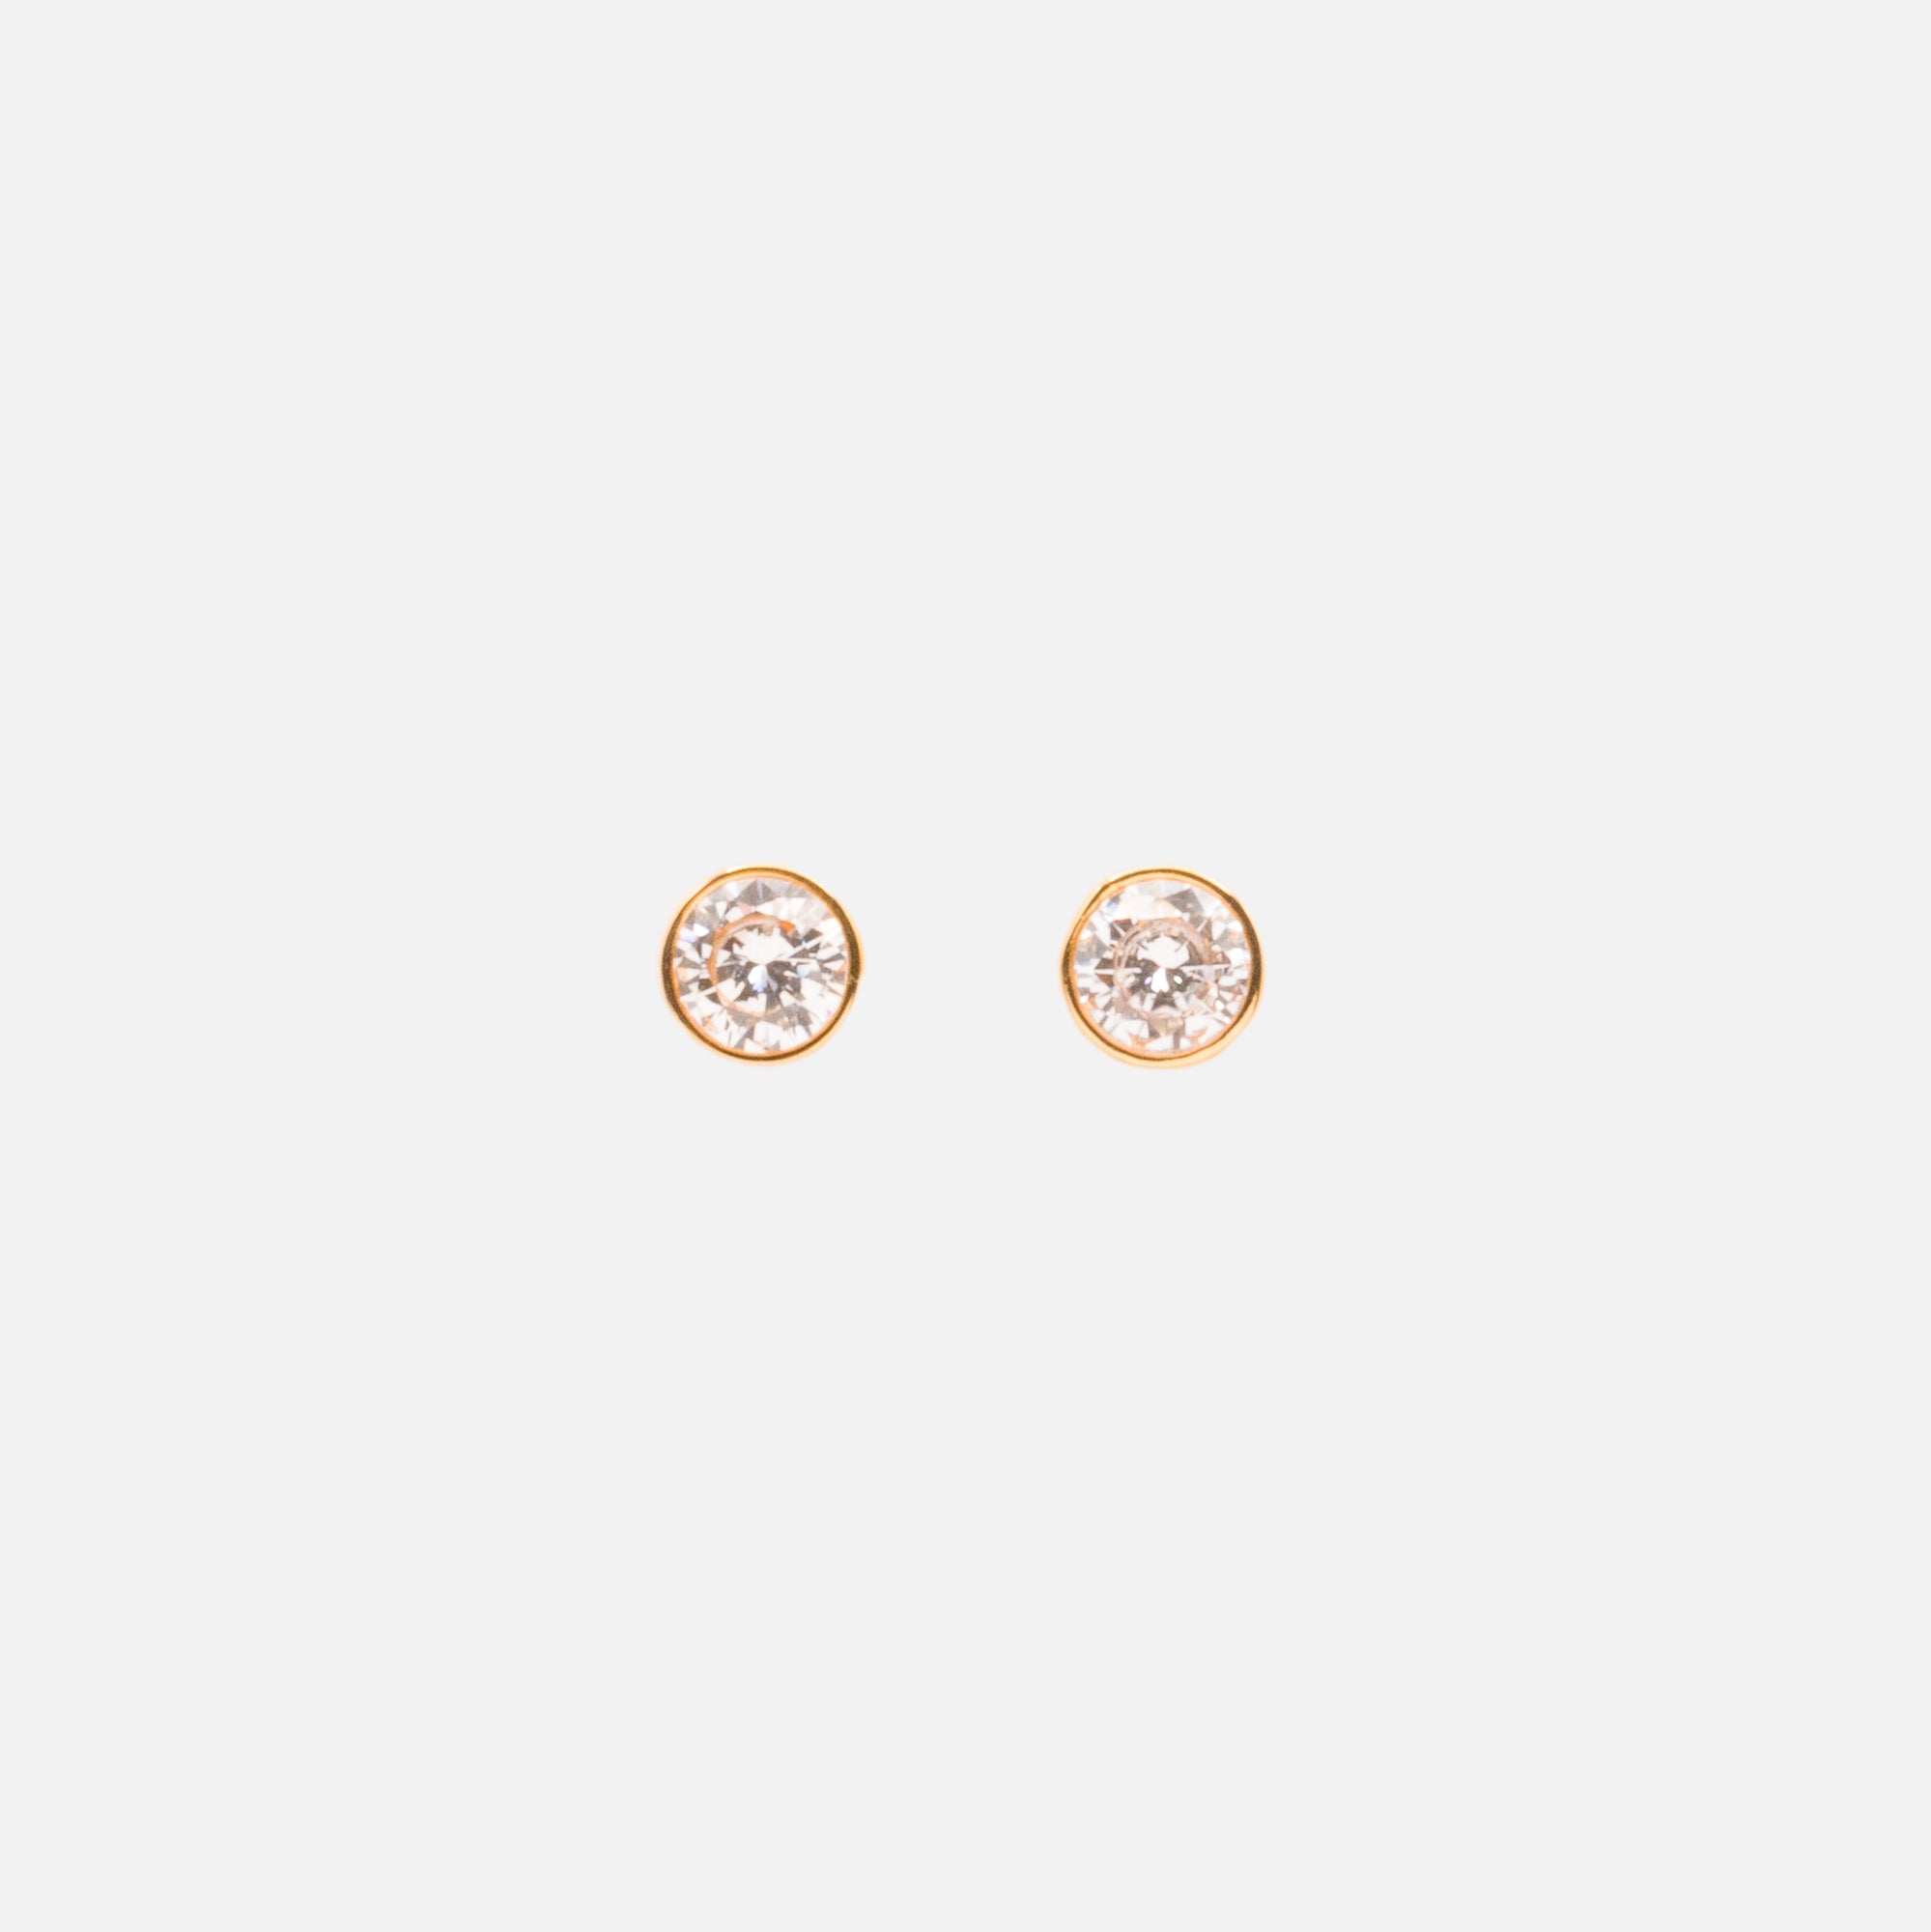 Gold fixed earrings with cubic zirconia in stainless steel